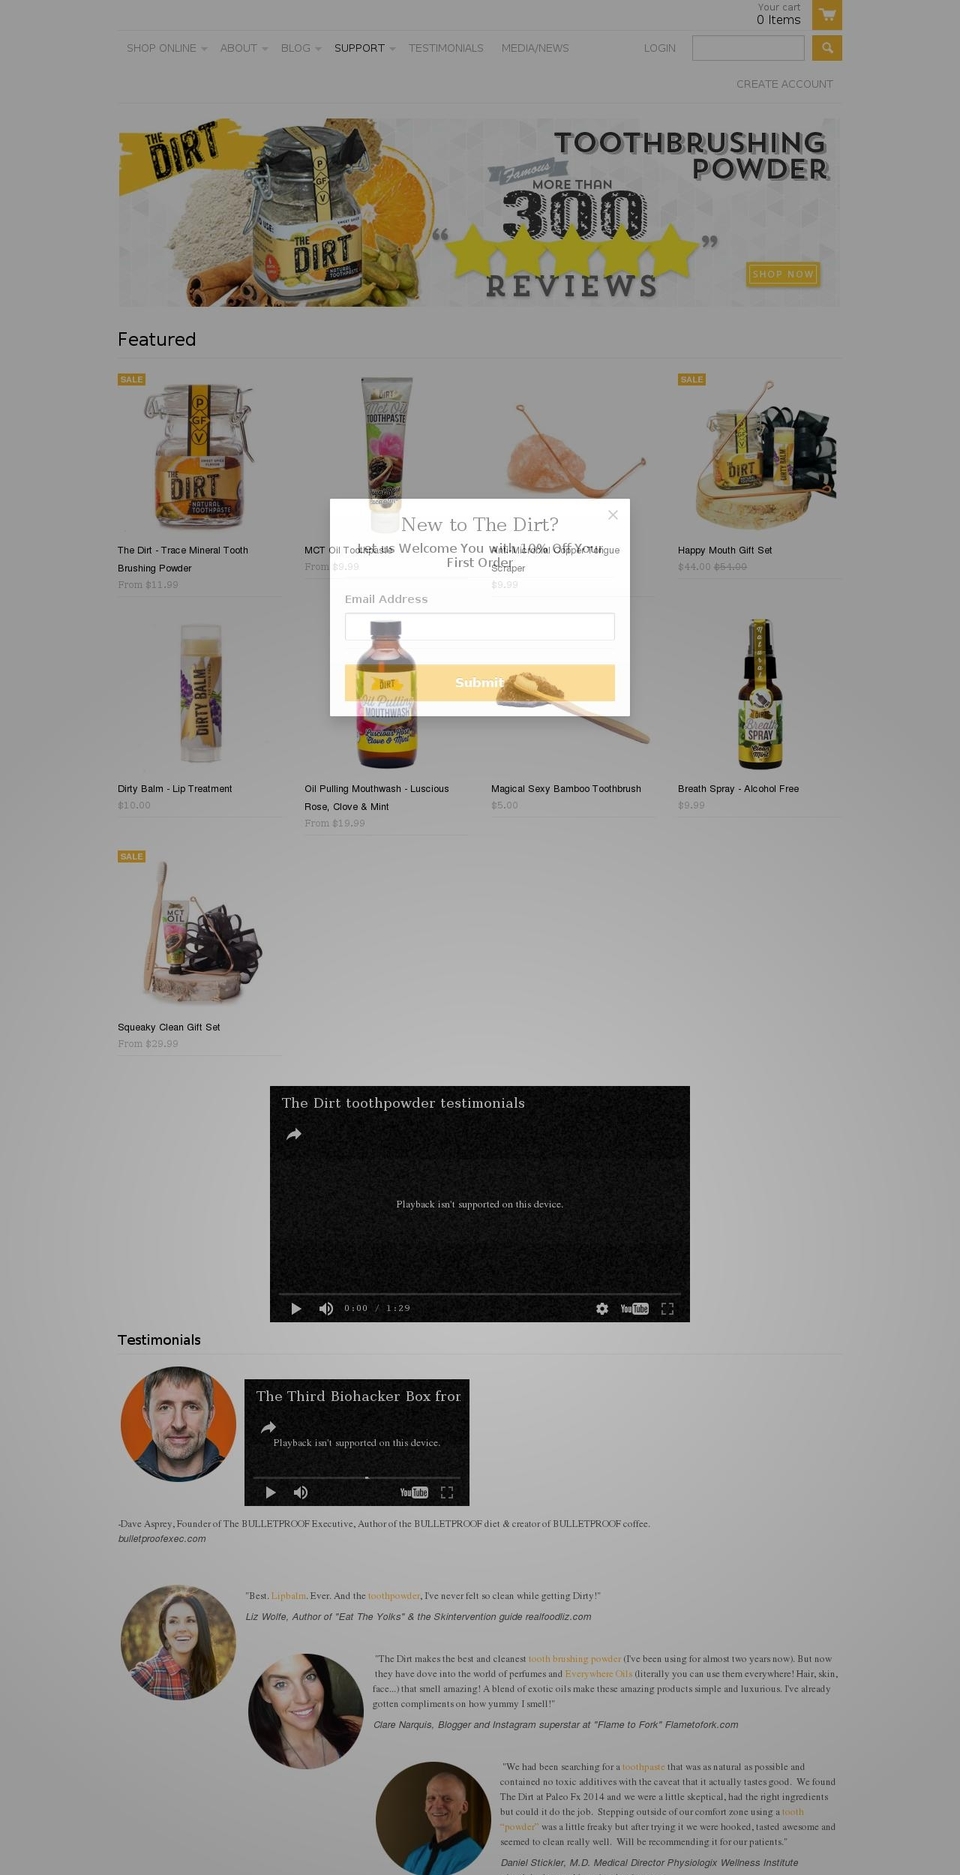 Mr Parker Shopify theme site example givemethedirt.com